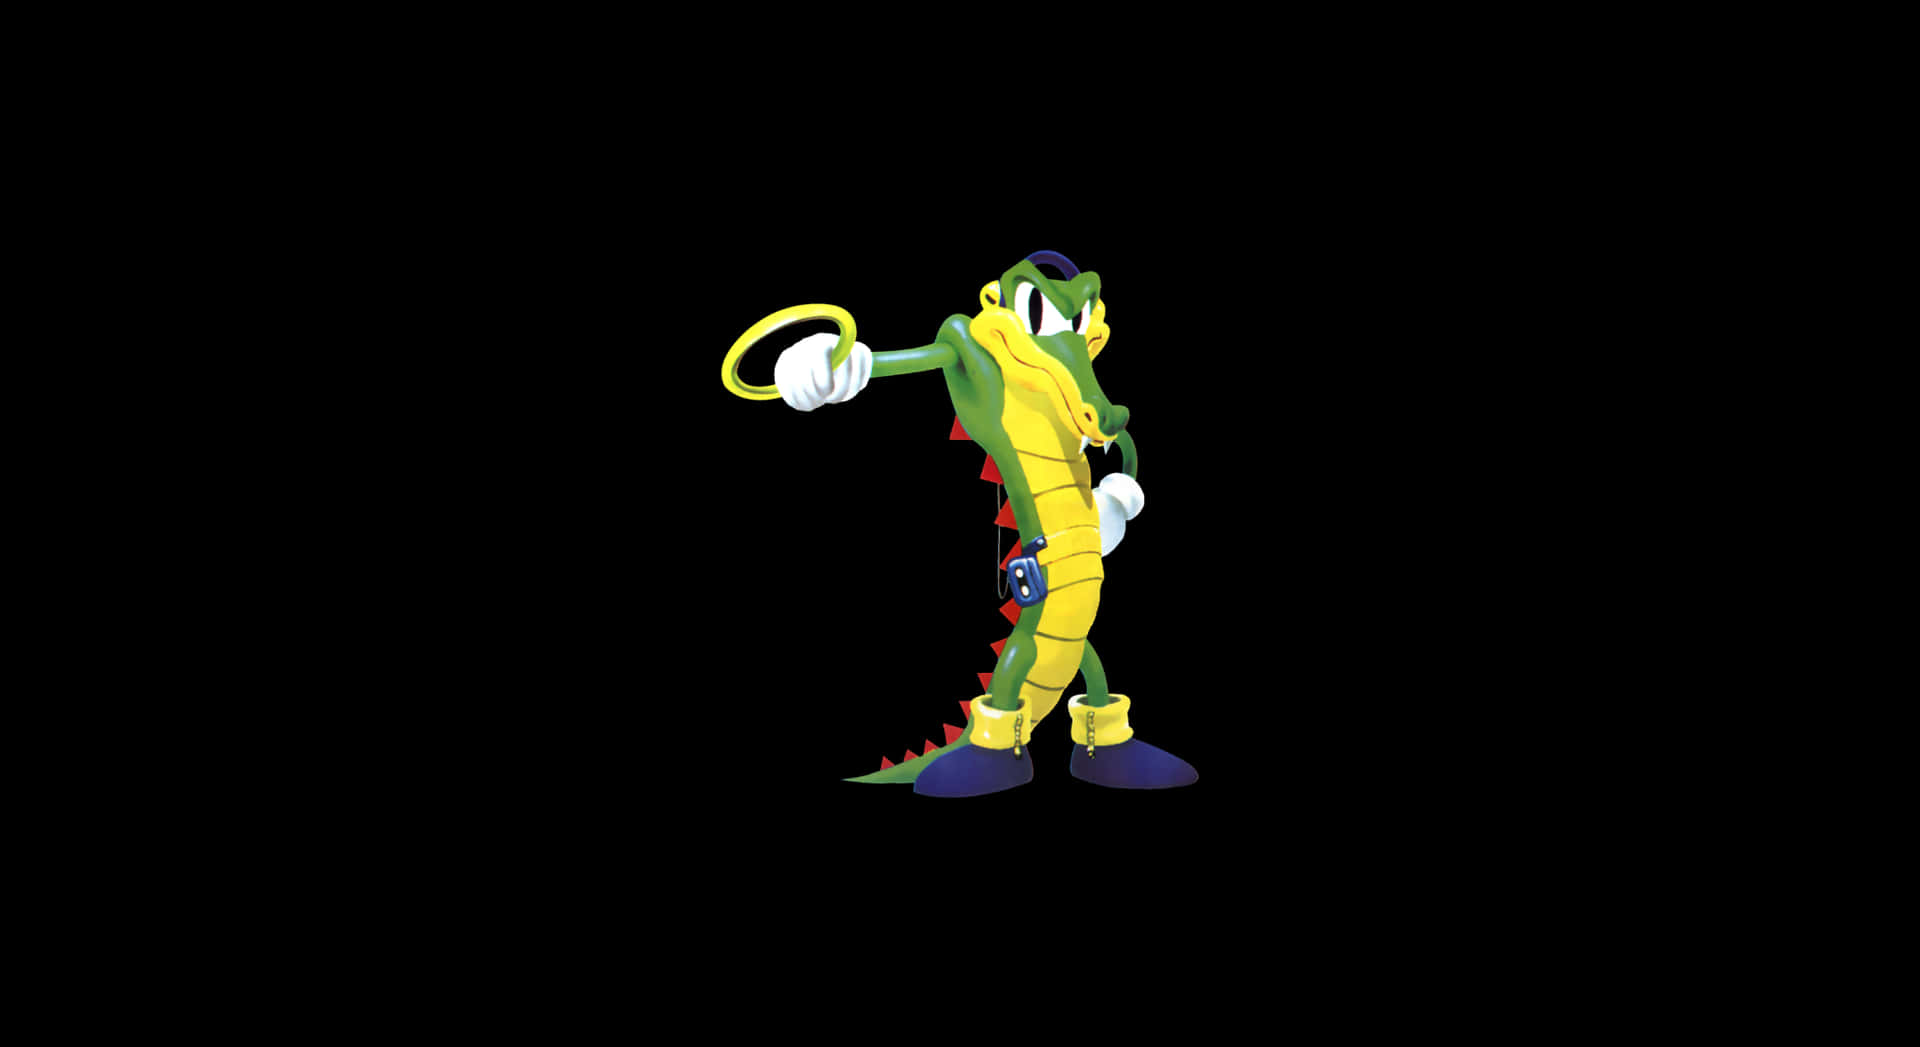 Vector The Crocodile Chilling In Style Wallpaper